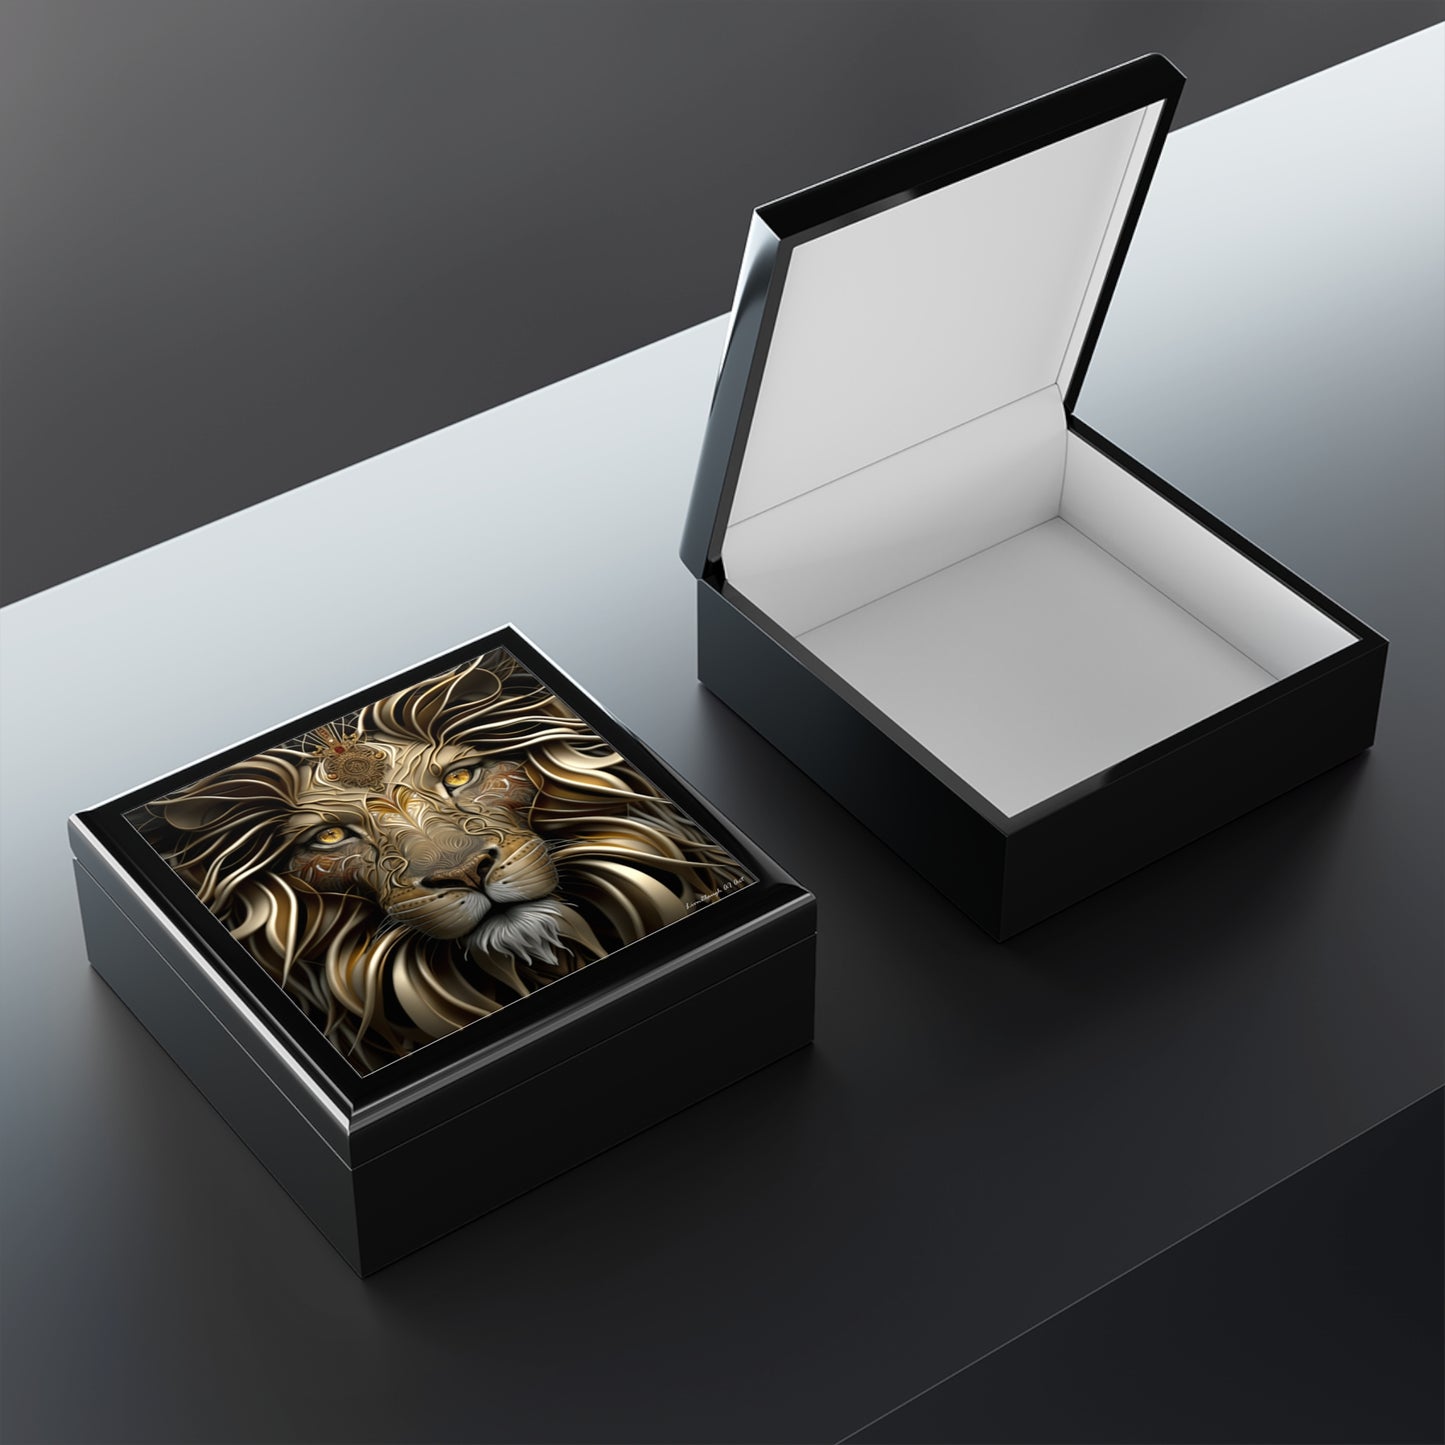 Lion Of The Jungle, Black or Brown Jewelry Box